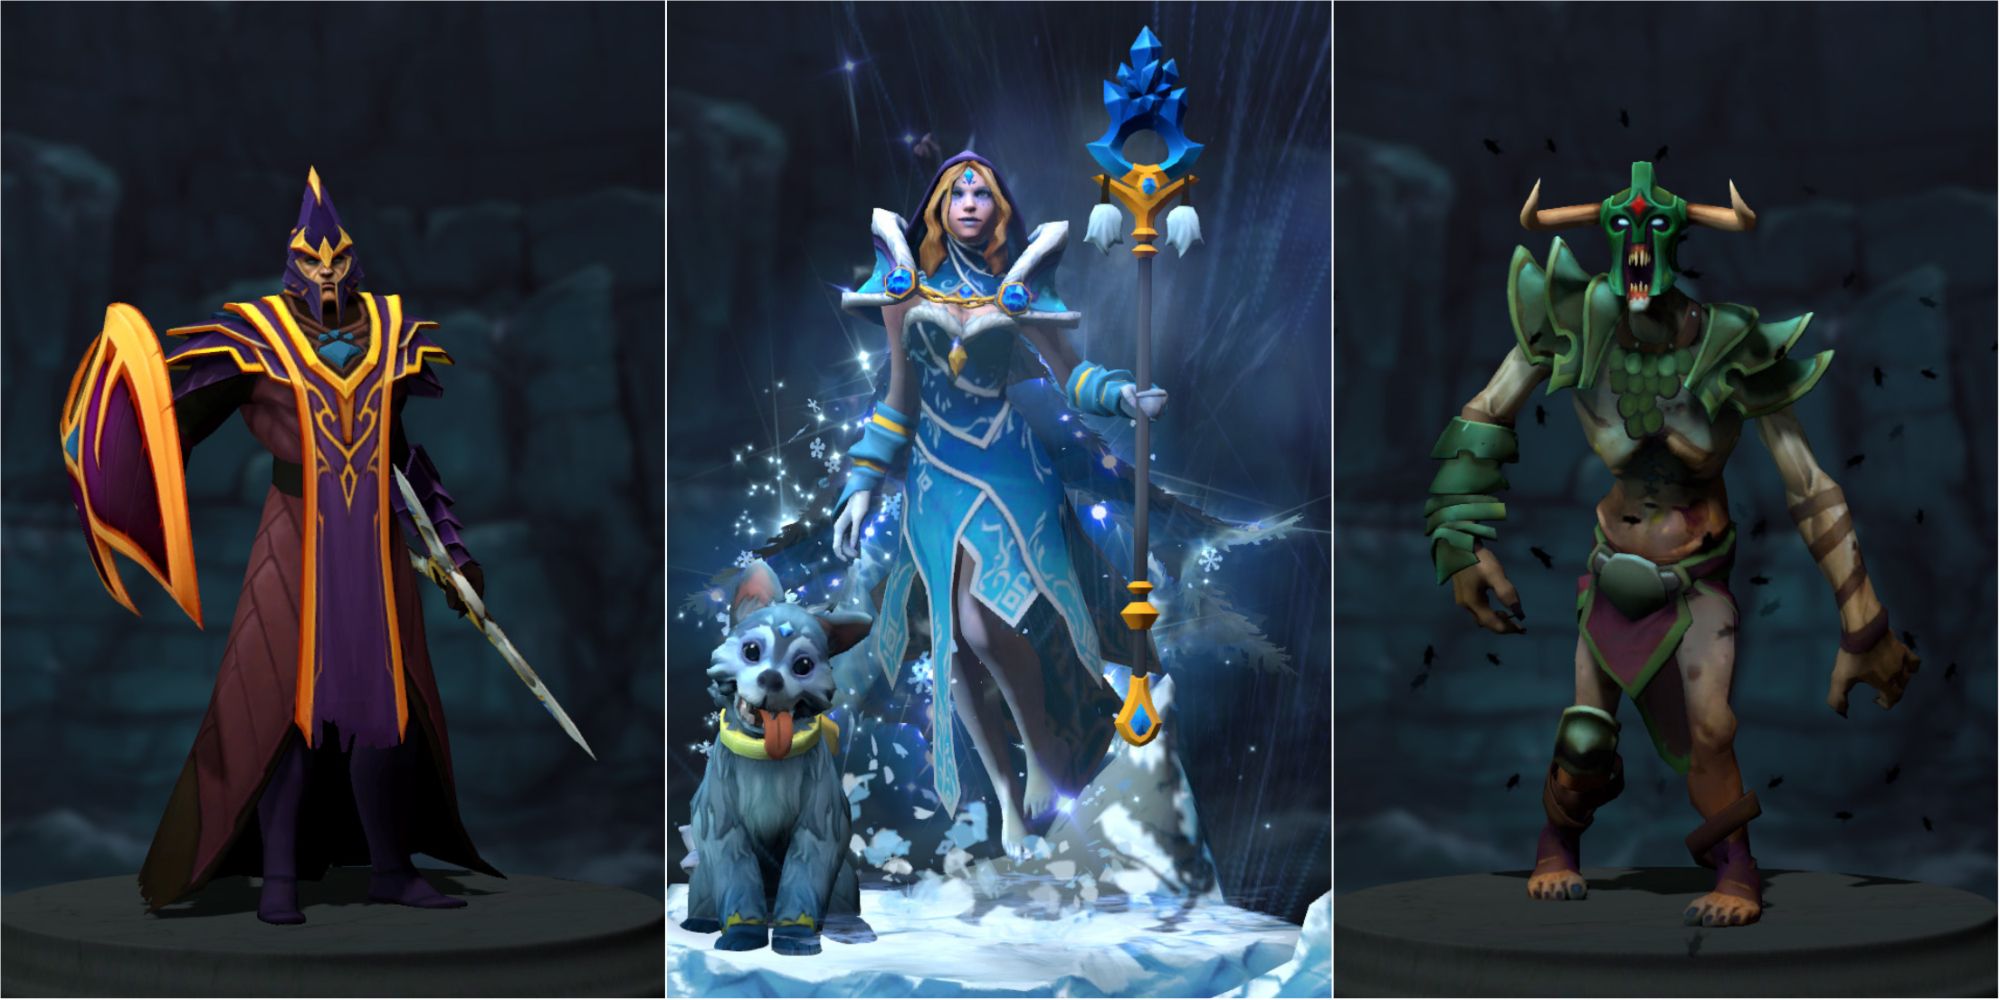 Dota 2 collage featuring crystal maiden, undying, and silencer